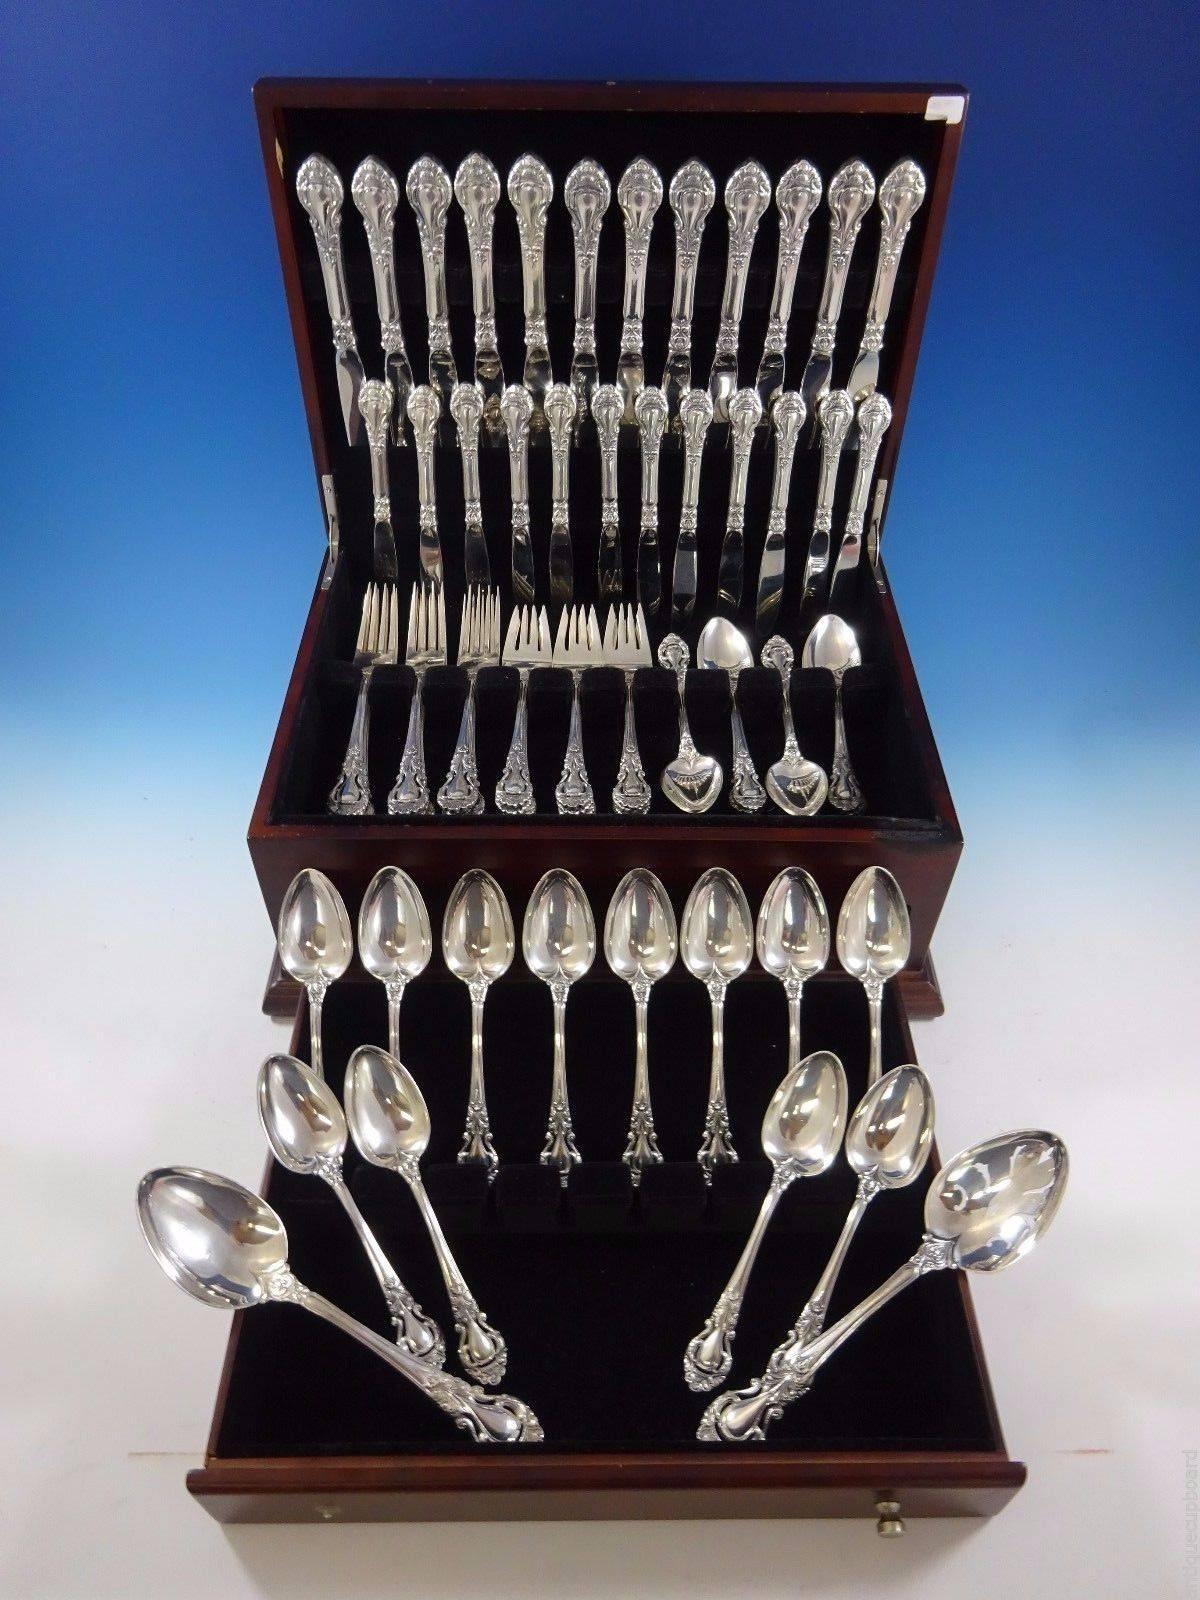 Royal dynasty by Kirk Stieff sterling silver flatware set - 74 pieces. This regal, beautiful pattern is well made and heavy. This set includes: 

12 knives, 9 1/8